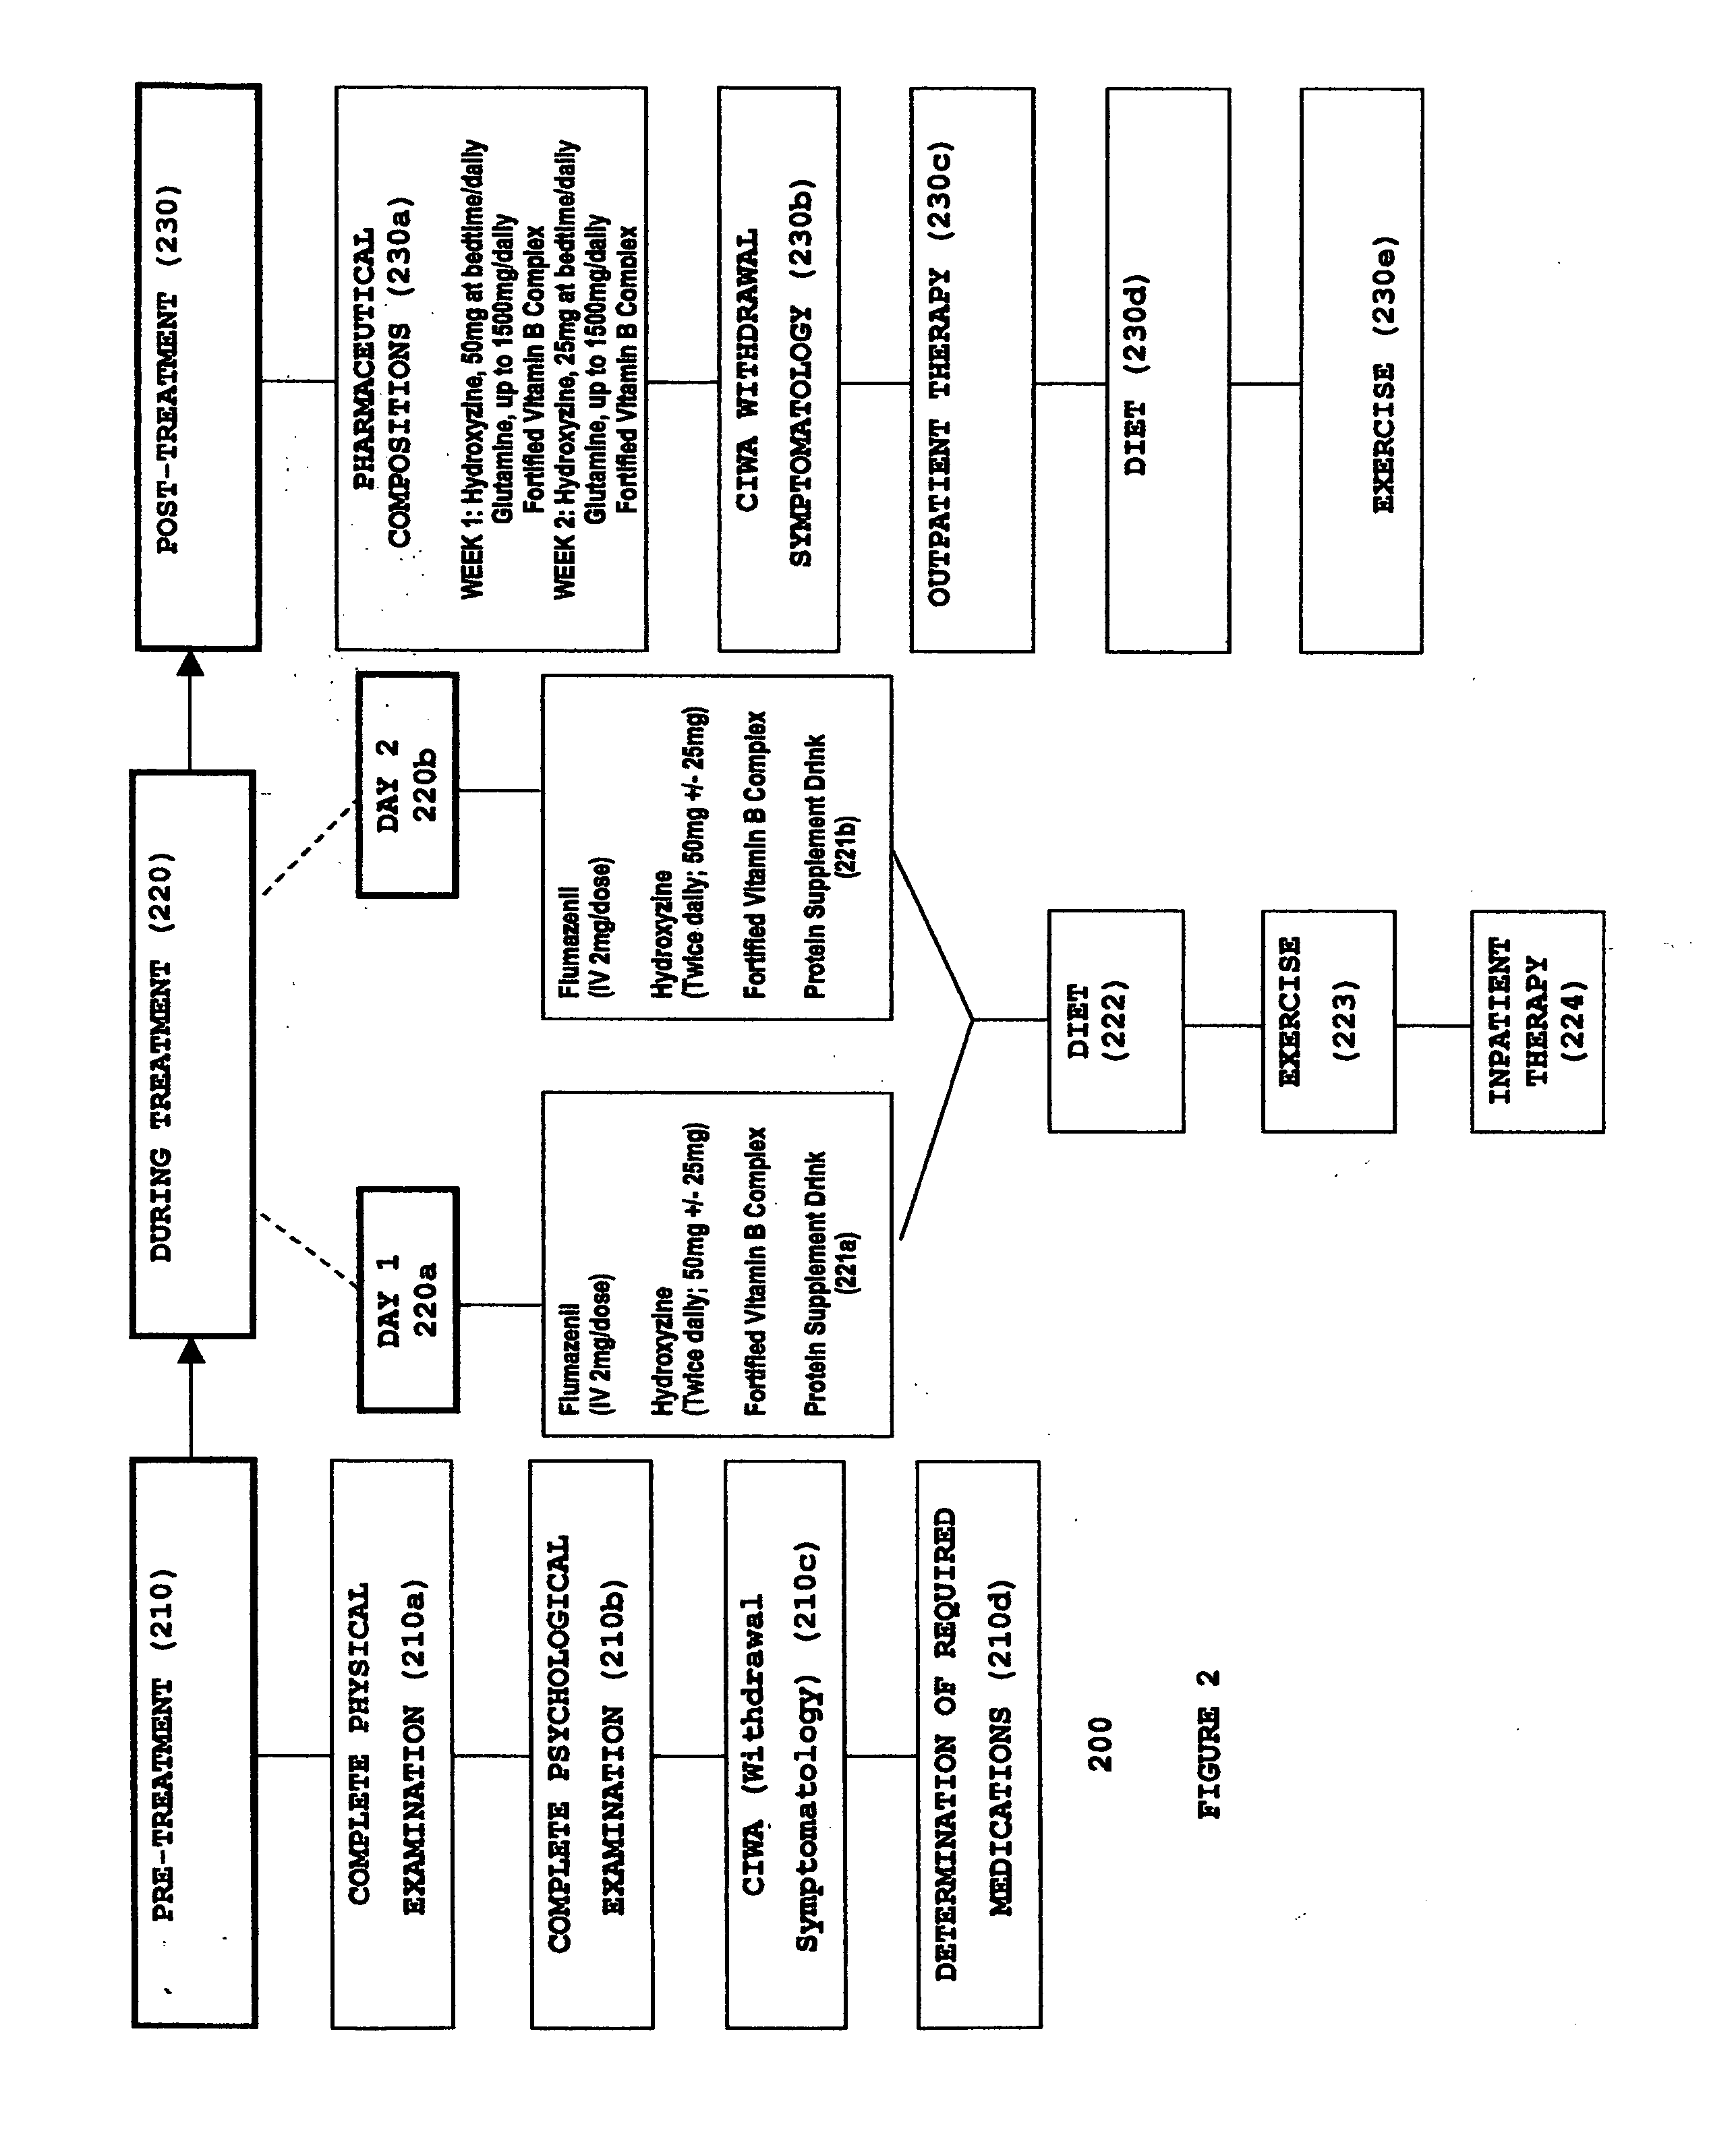 Use of selective chloride channel modulators to treat alcohol and/or stimulant substance abuse